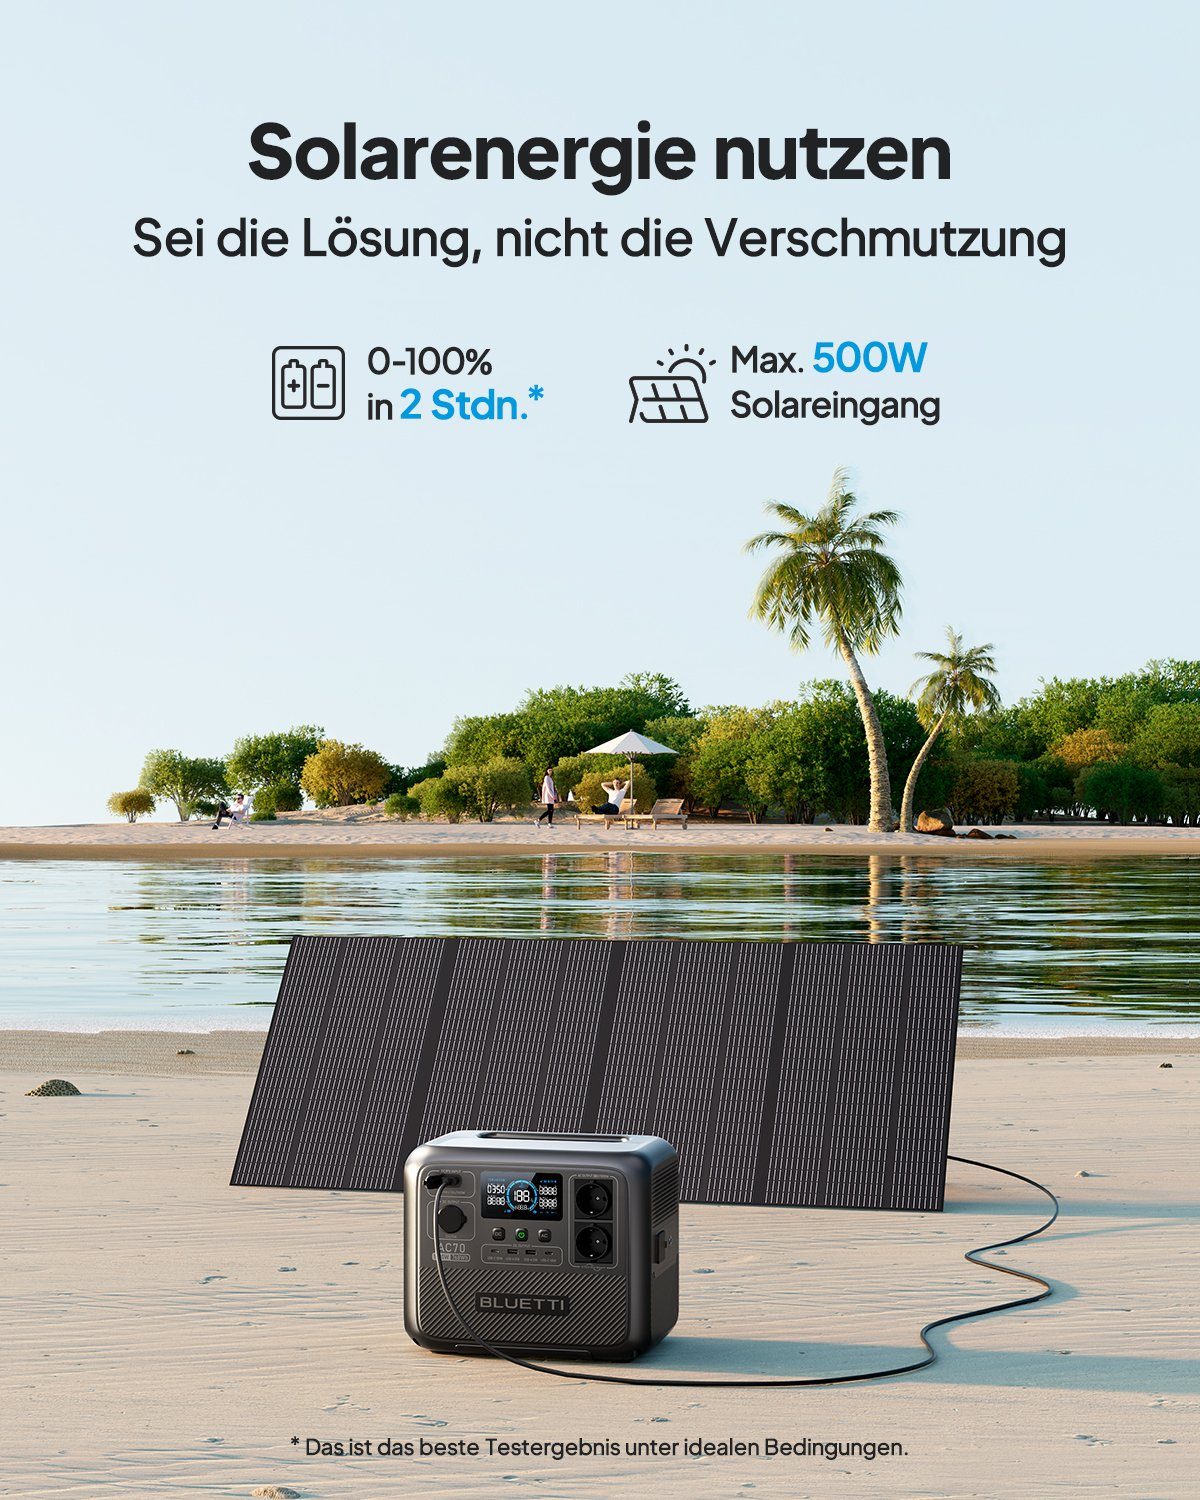 Power Lifting 2000W Notfall Camping, kW, 1,00 Akku-Zelle), 768Wh/1000W AC70 Power tragbarer in (Packung, Haus, Stromerzeuger für BLUETTI Station, LiFePO4